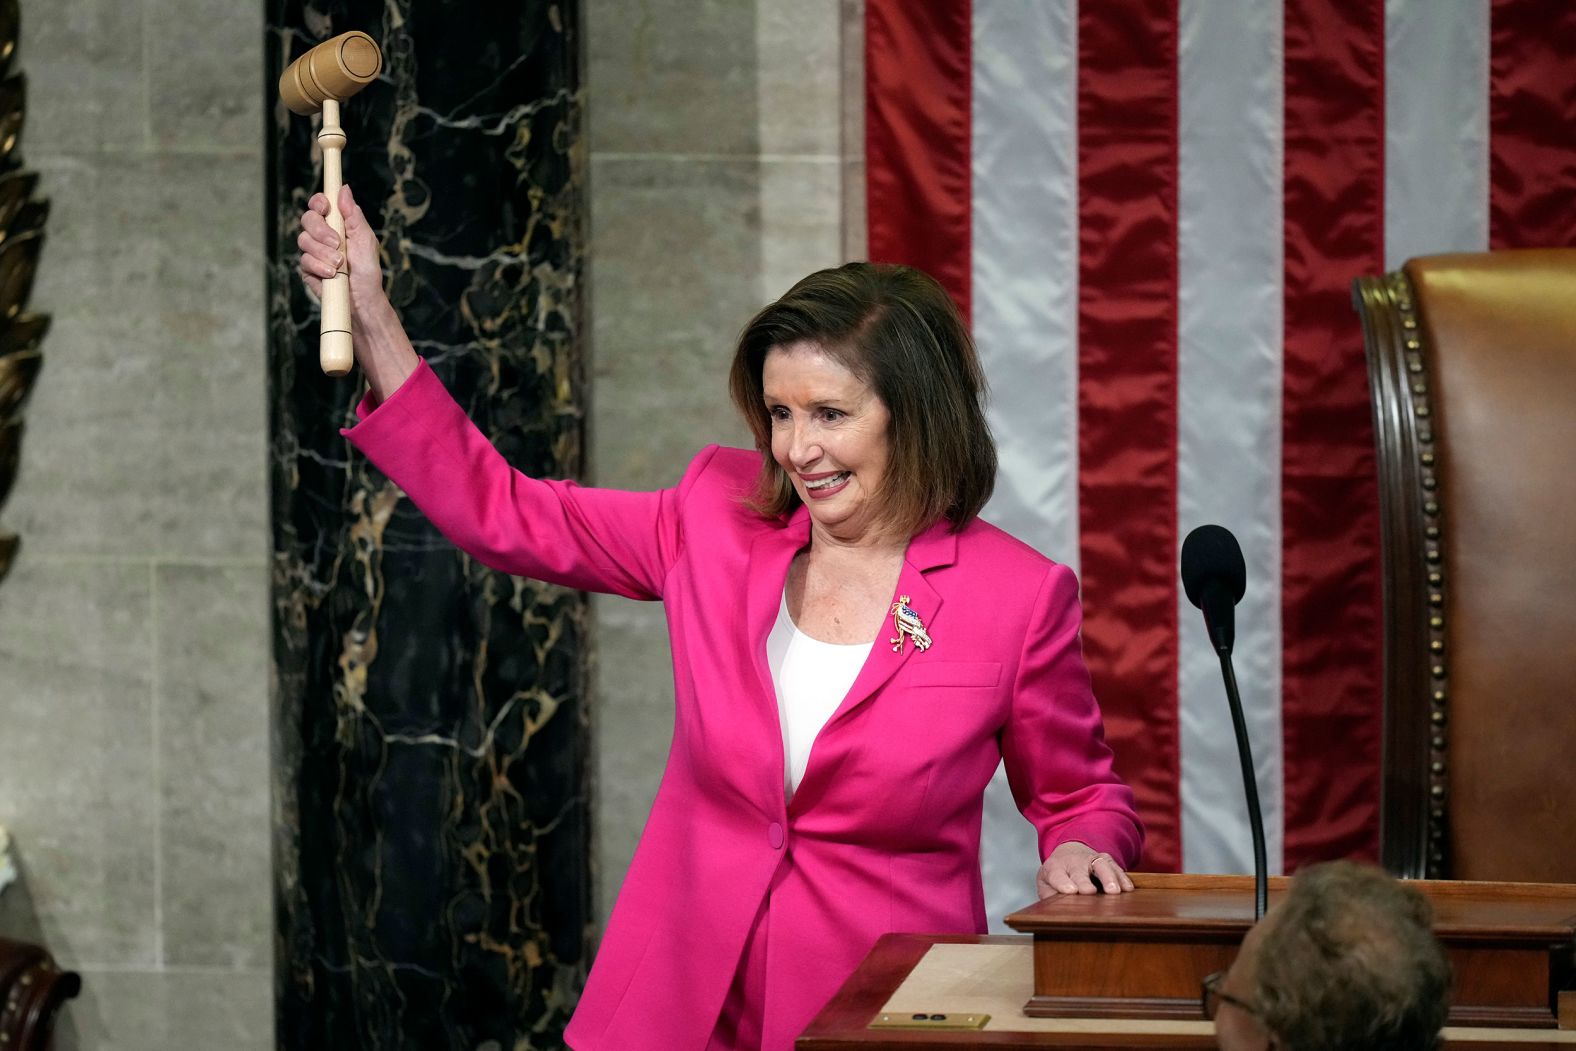 Outgoing US House Speaker <a href="index.php?page=&url=http%3A%2F%2Fwww.cnn.com%2F2022%2F11%2F17%2Fpolitics%2Fgallery%2Fnancy-pelosi%2Findex.html" target="_blank">Nancy Pelosi</a> holds the gavel as she calls the House to order on Tuesday, January 3.